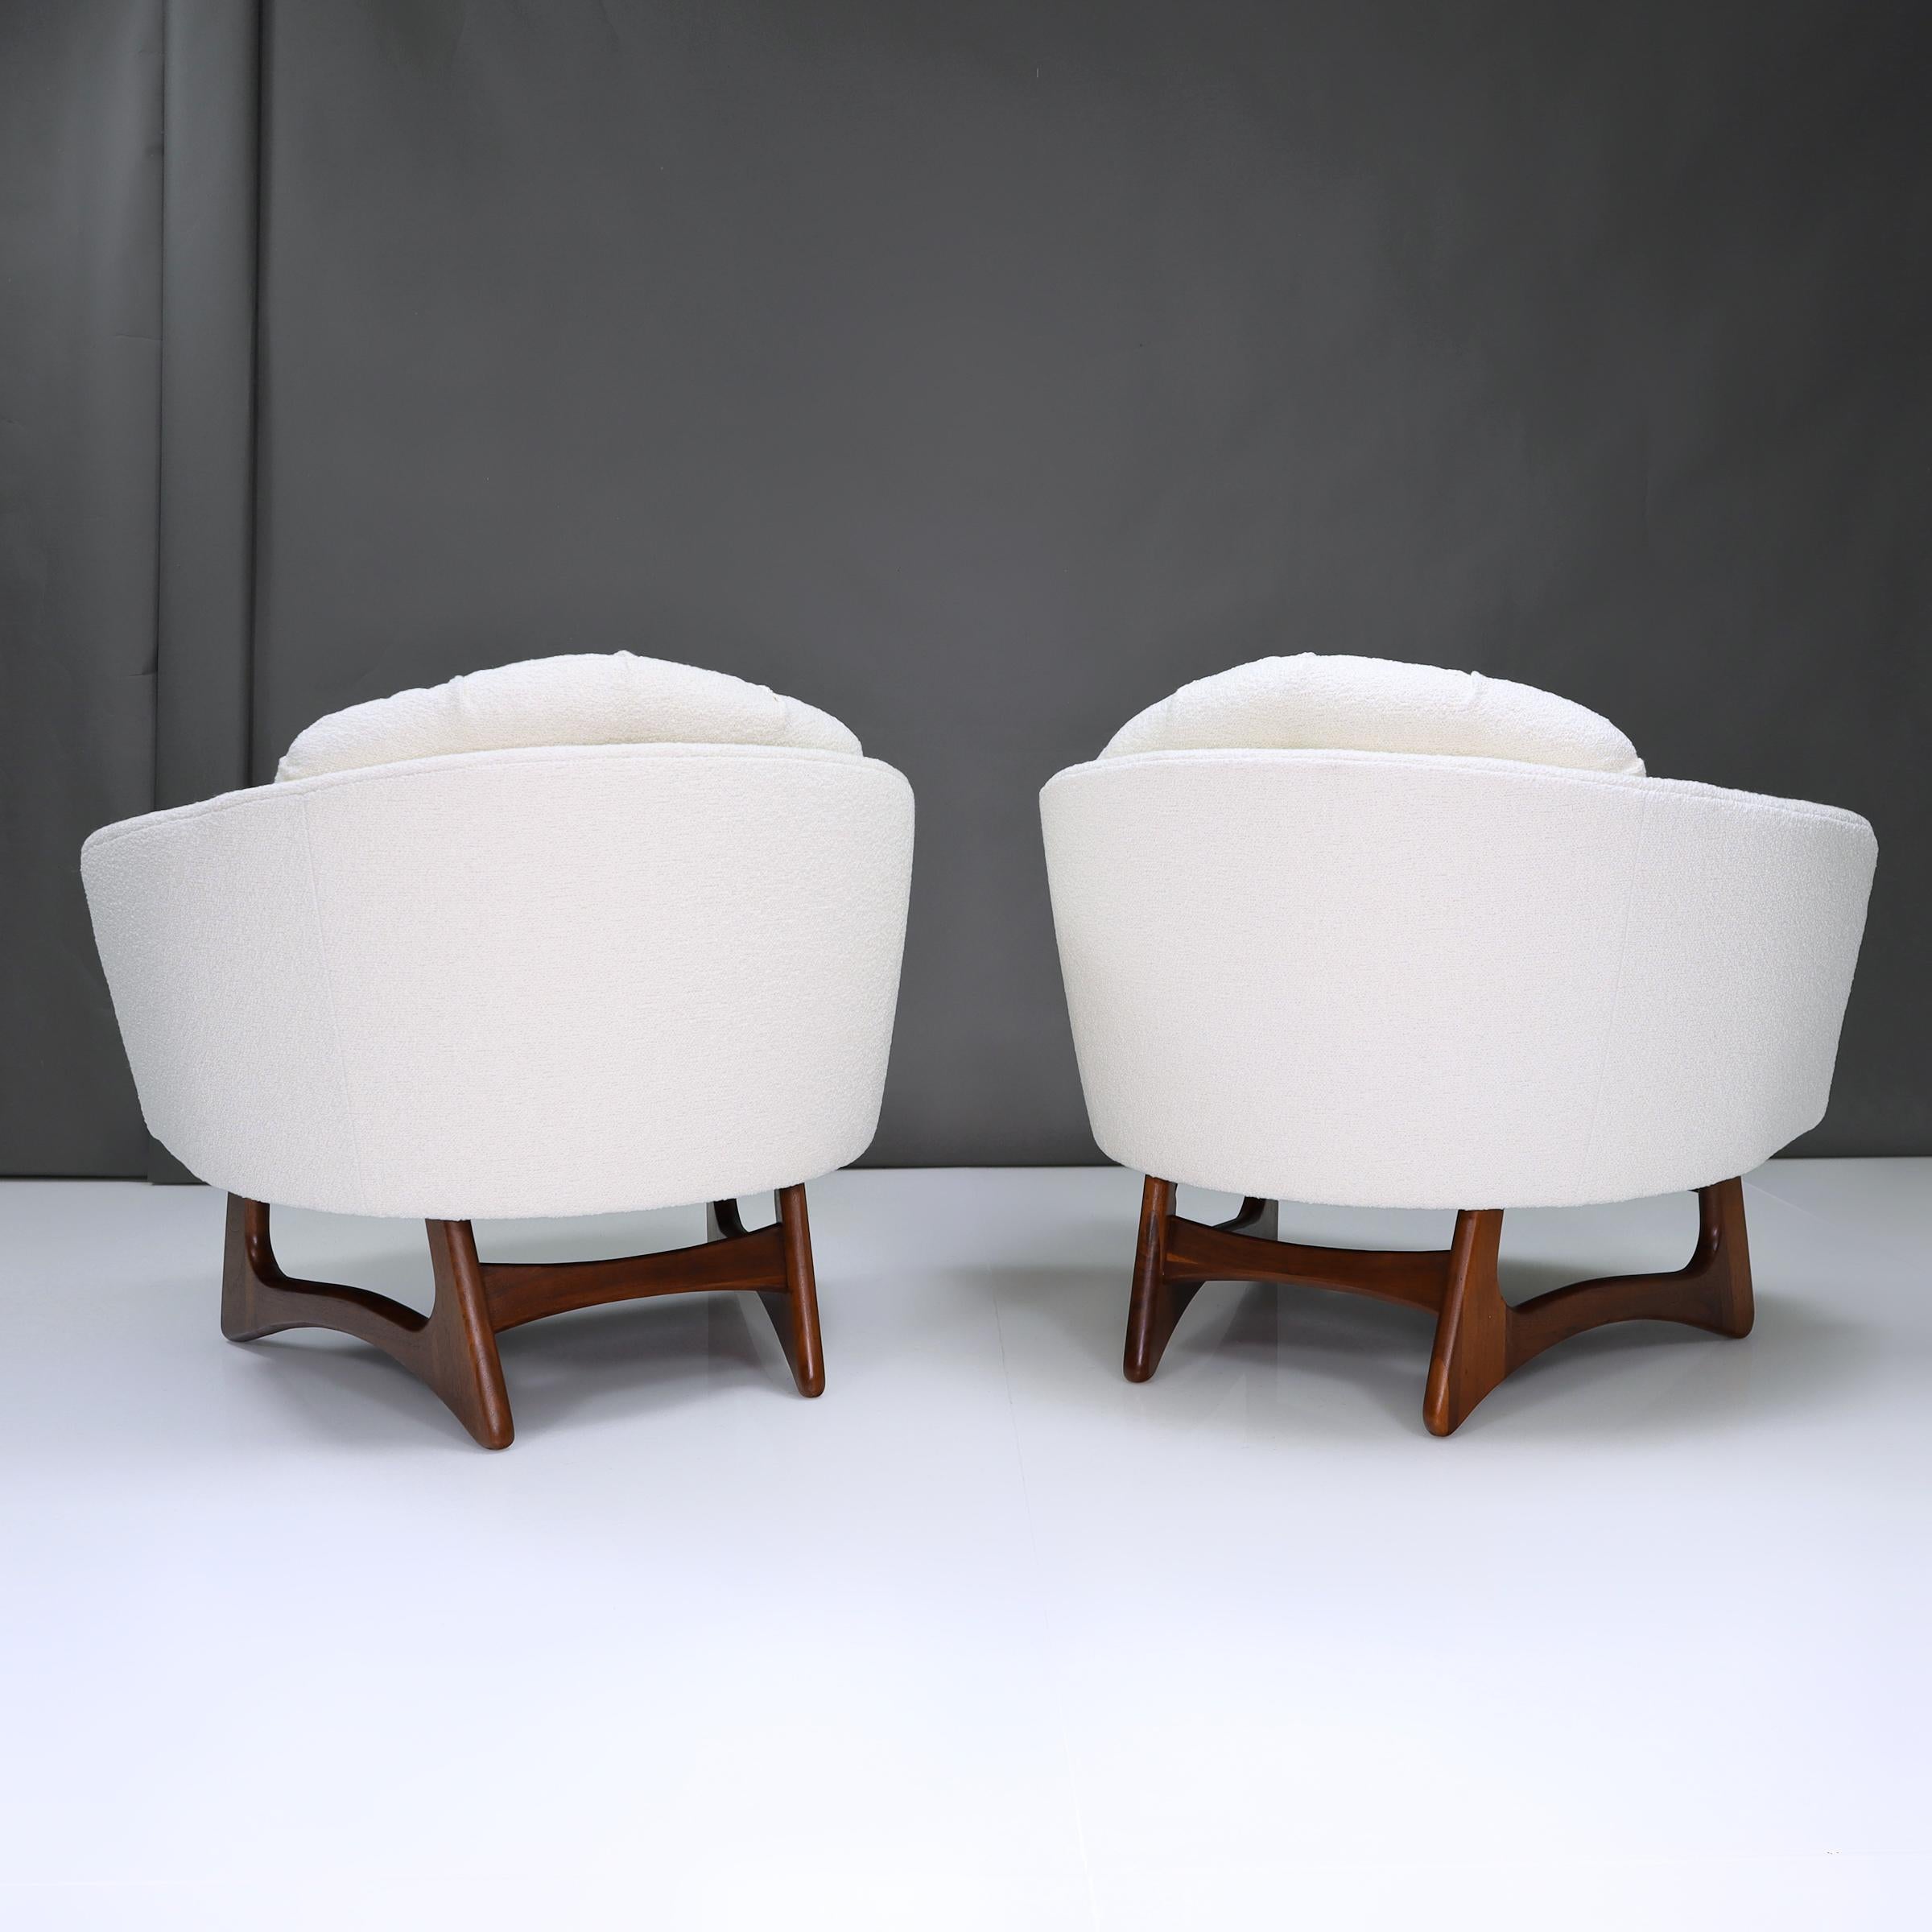 Mid-Century Modern 1960s Adrian Pearsall for Craft Associates Barrel Chairs - A Pair For Sale